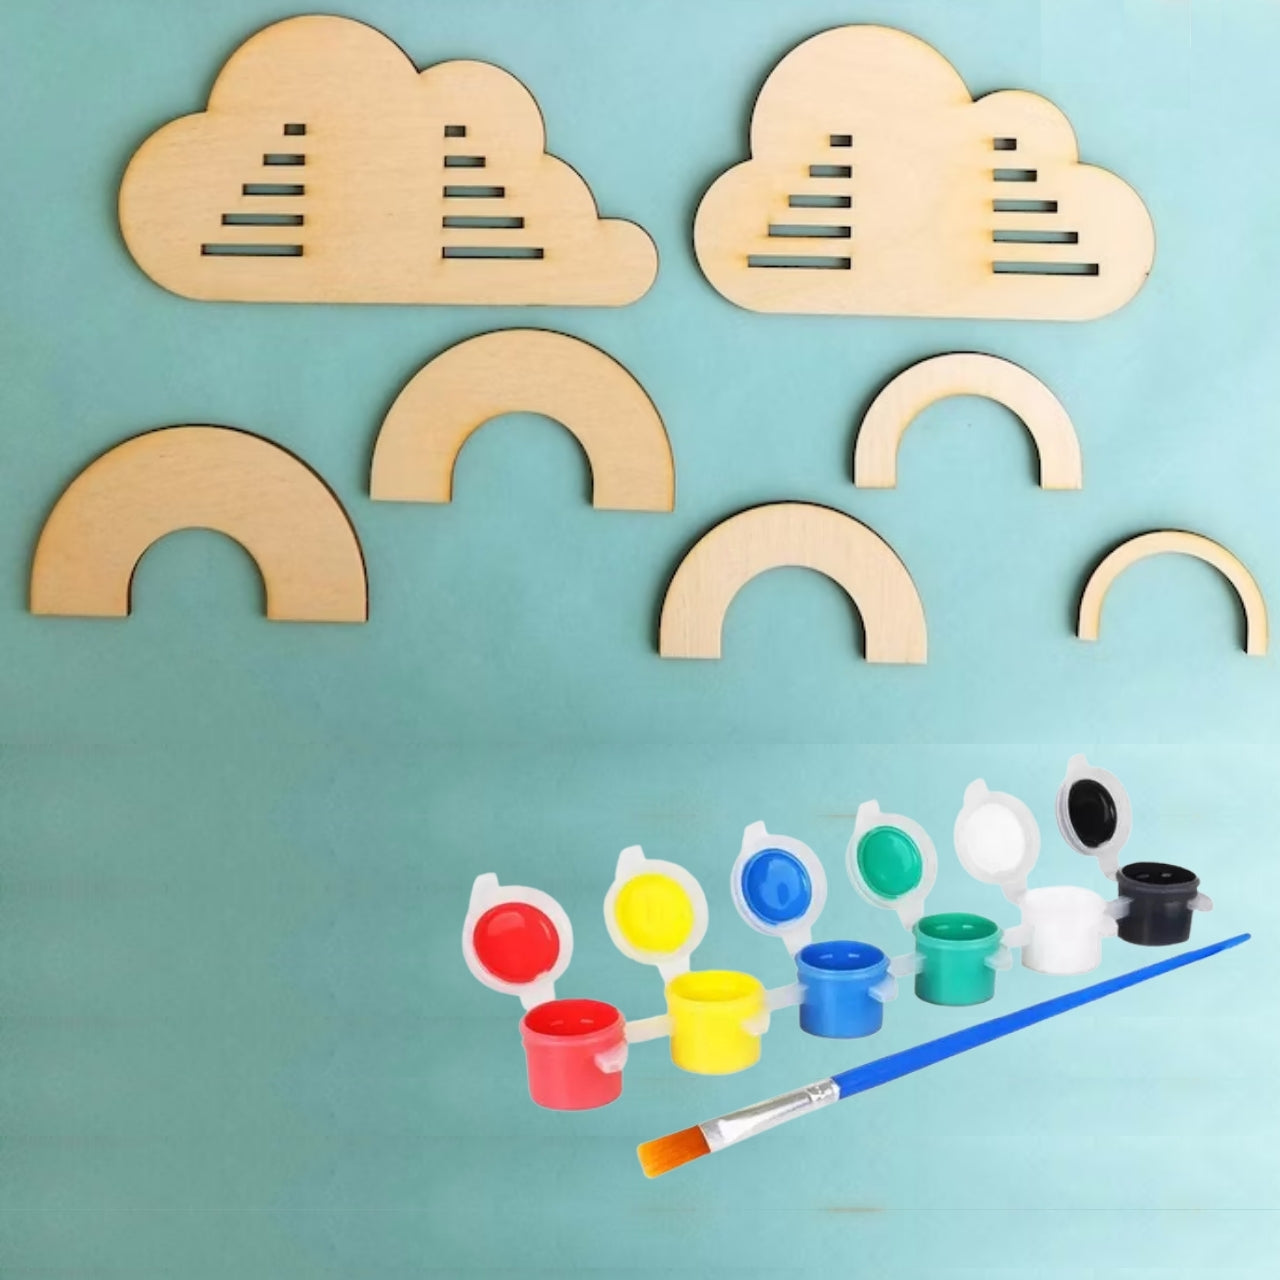 Unfinished Wooden Flower Cutouts Craft Kits